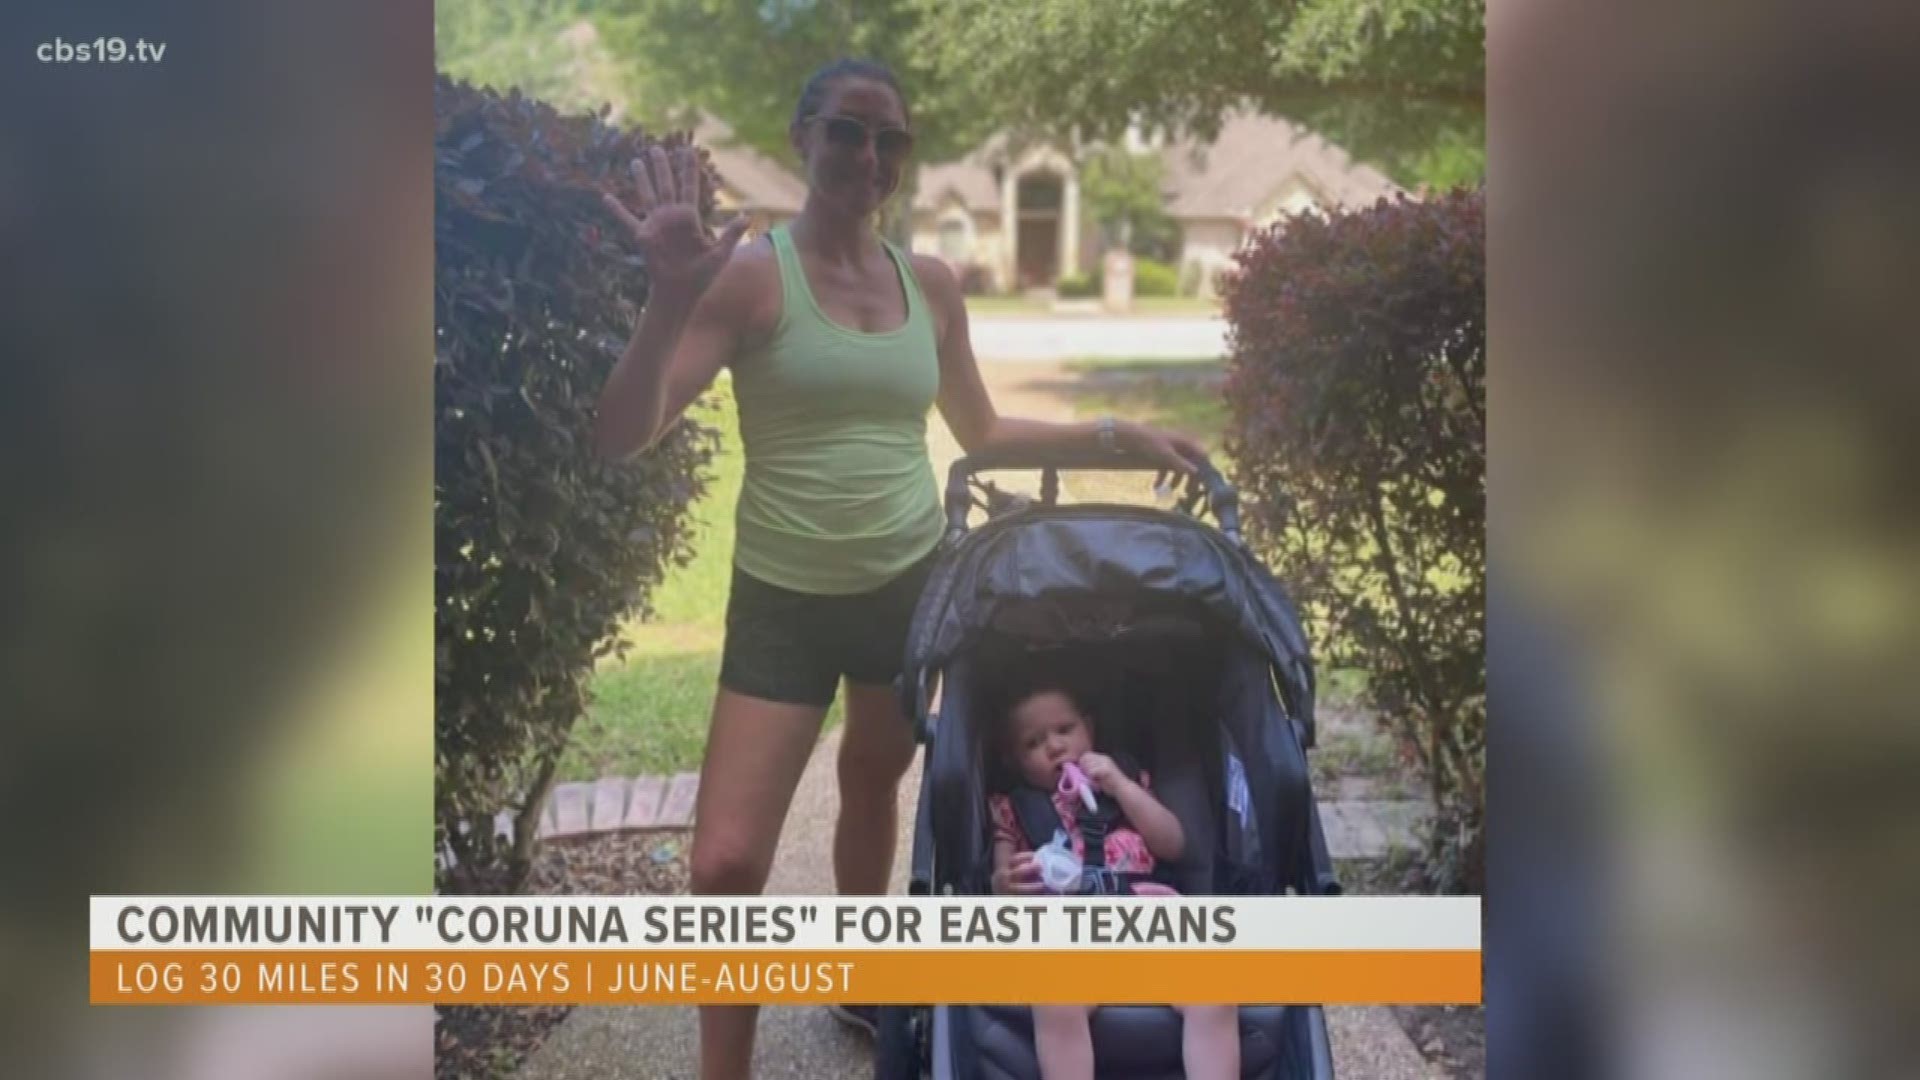 Looking for a way to stay active during COVID-19? A Tyler based company iTRI365 created the "CoRUNa Series" for East Texans.